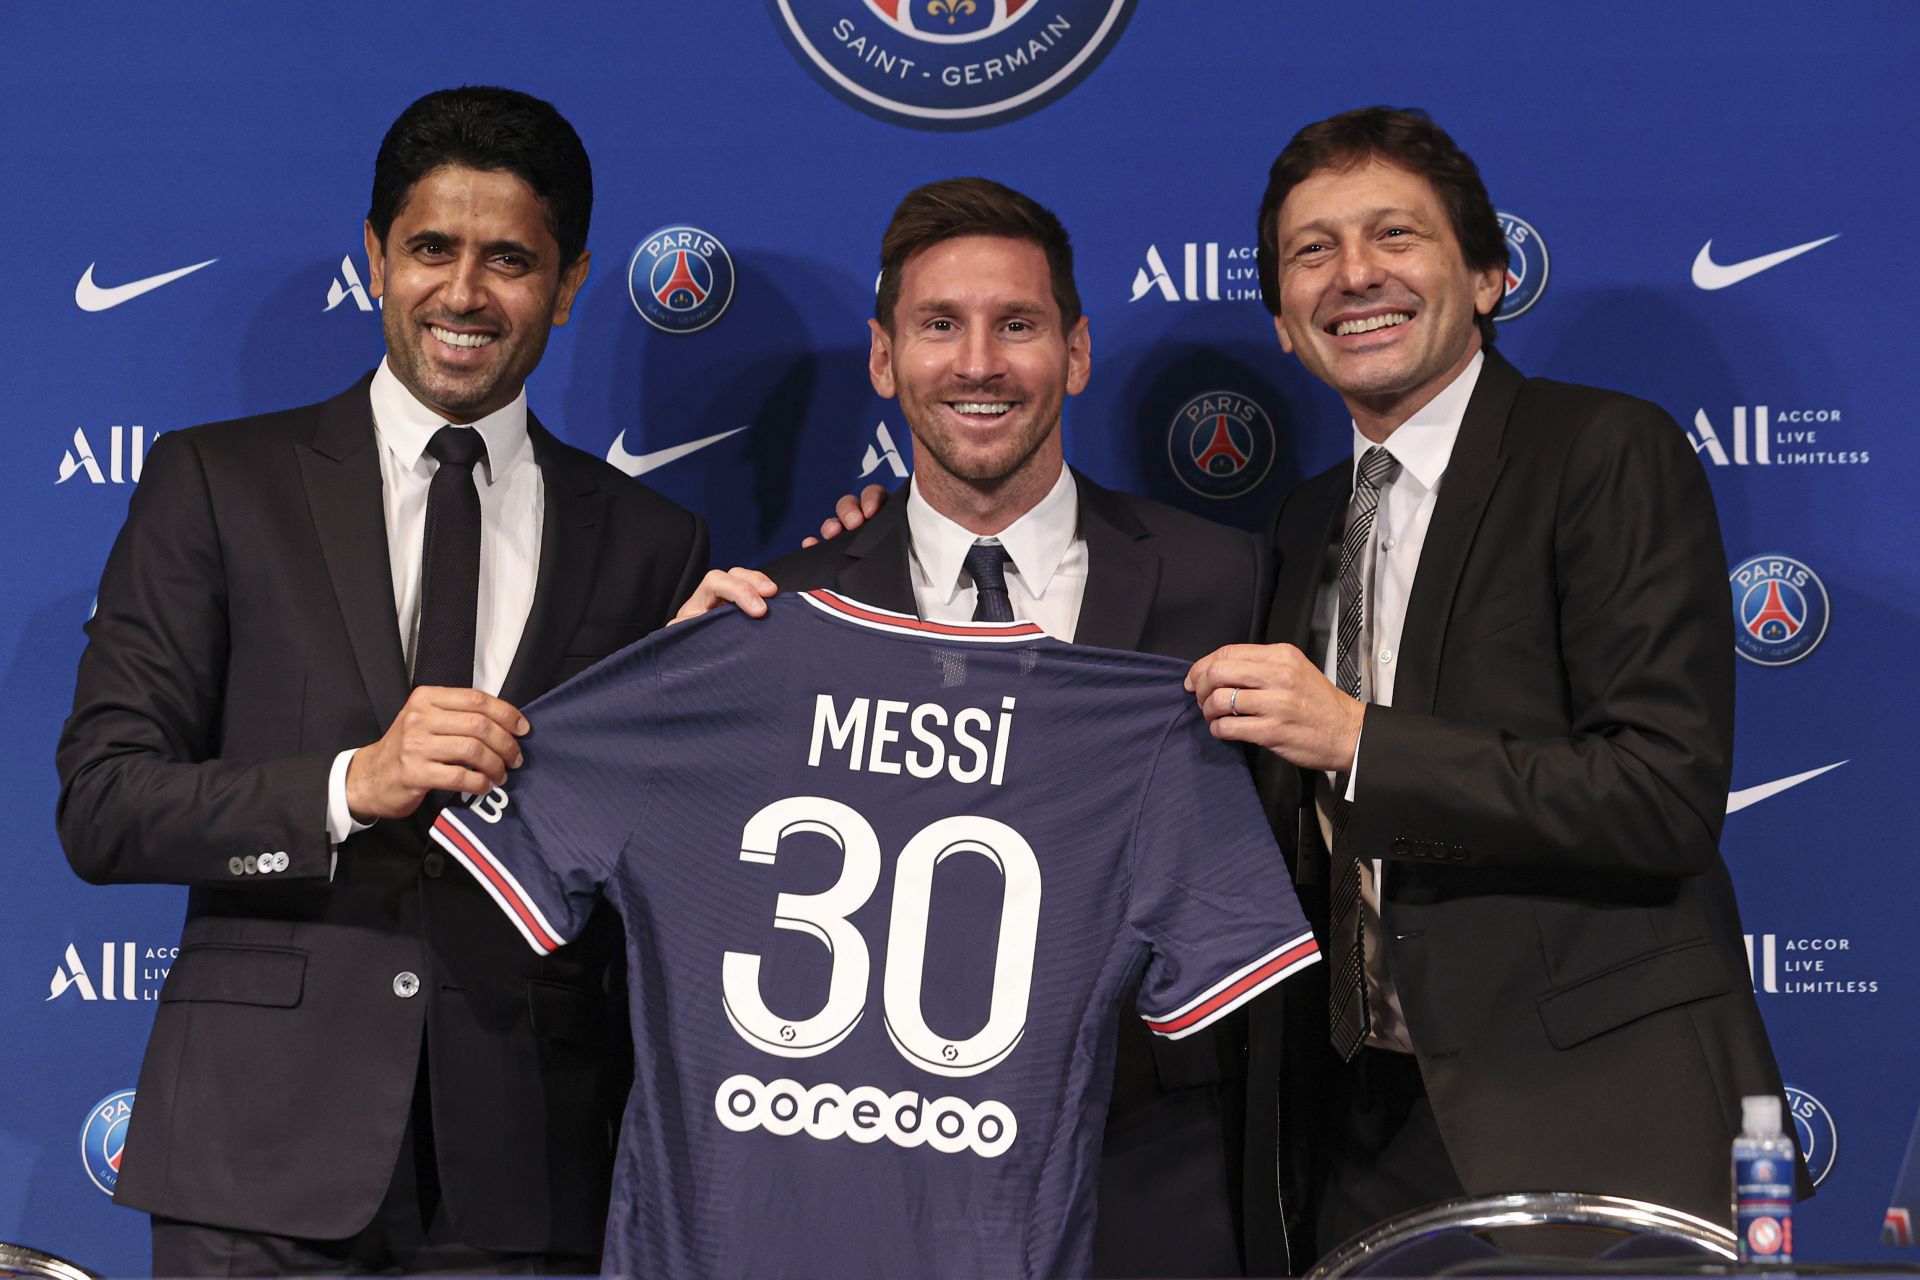 Lionel Messi shocked the football world by joining PSG